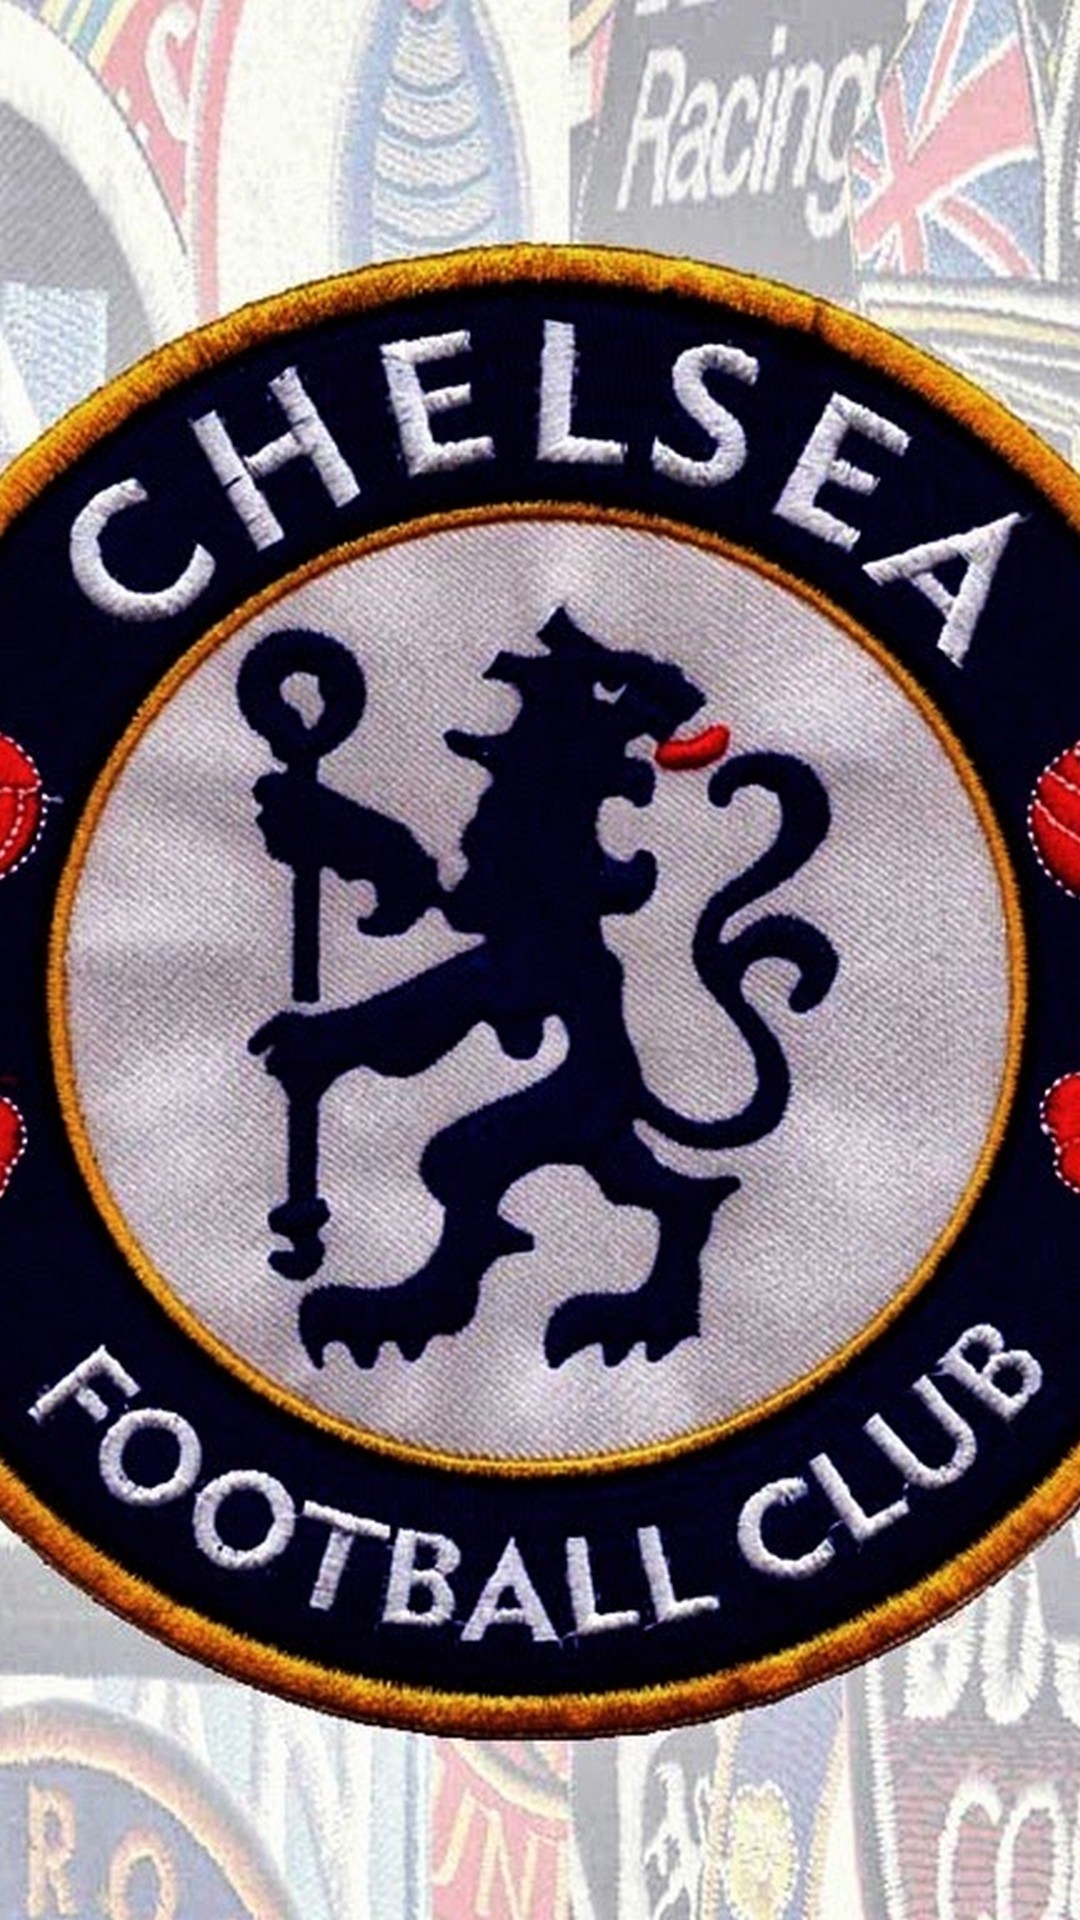 iPhone Wallpaper HD Chelsea Football With Resolution 1080X1920 pixel. You can make this wallpaper for your Mac or Windows Desktop Background, iPhone, Android or Tablet and another Smartphone device for free